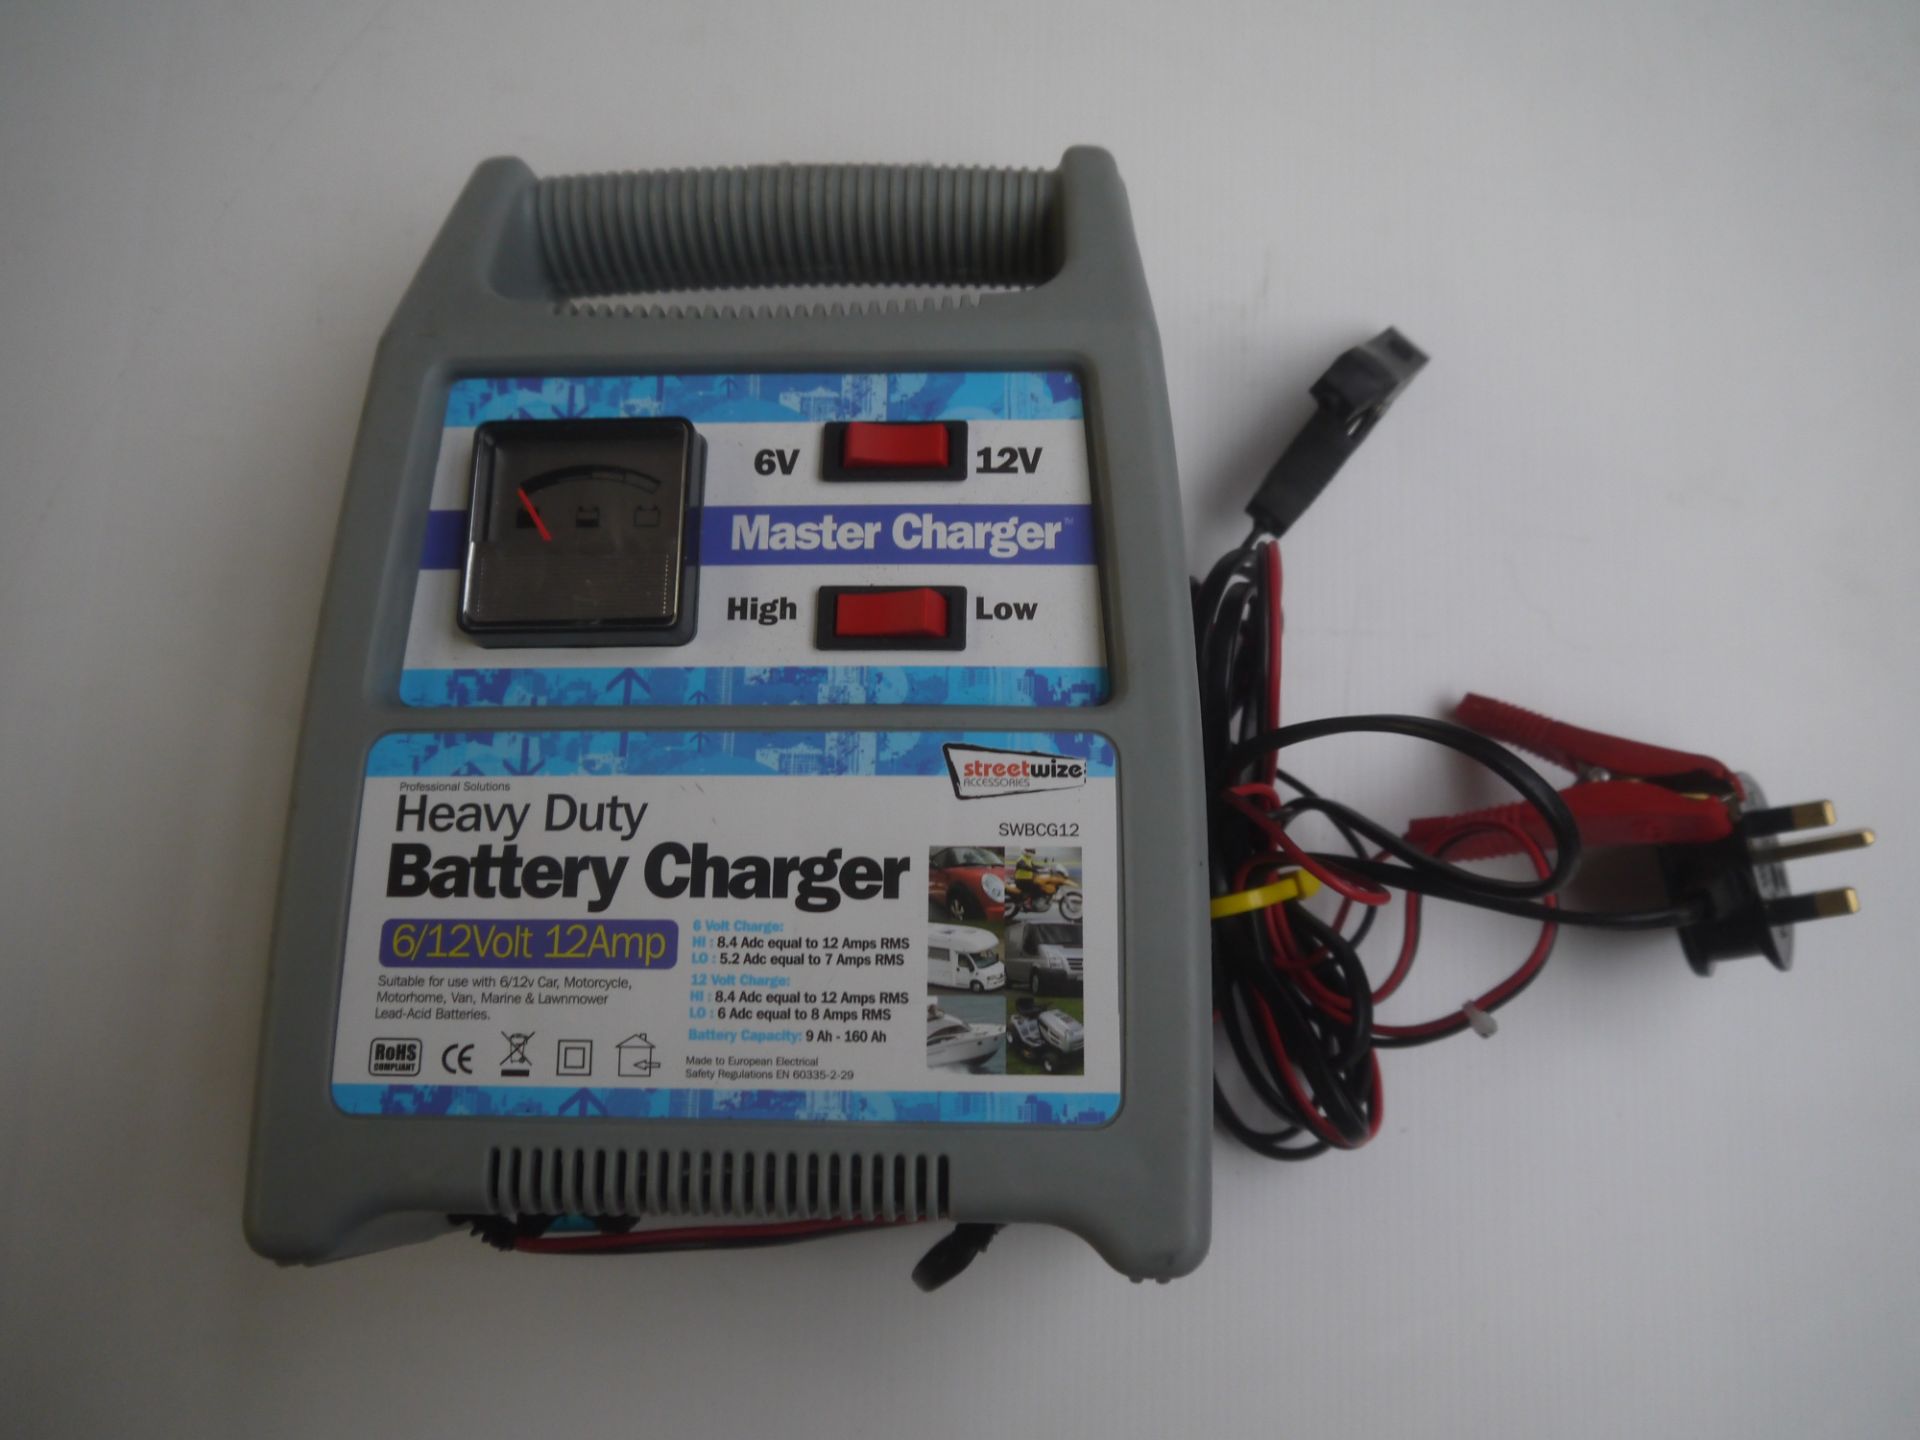 StreetWize 6/12V 12Amp Heavy Duty Battery Charger. Boxed.